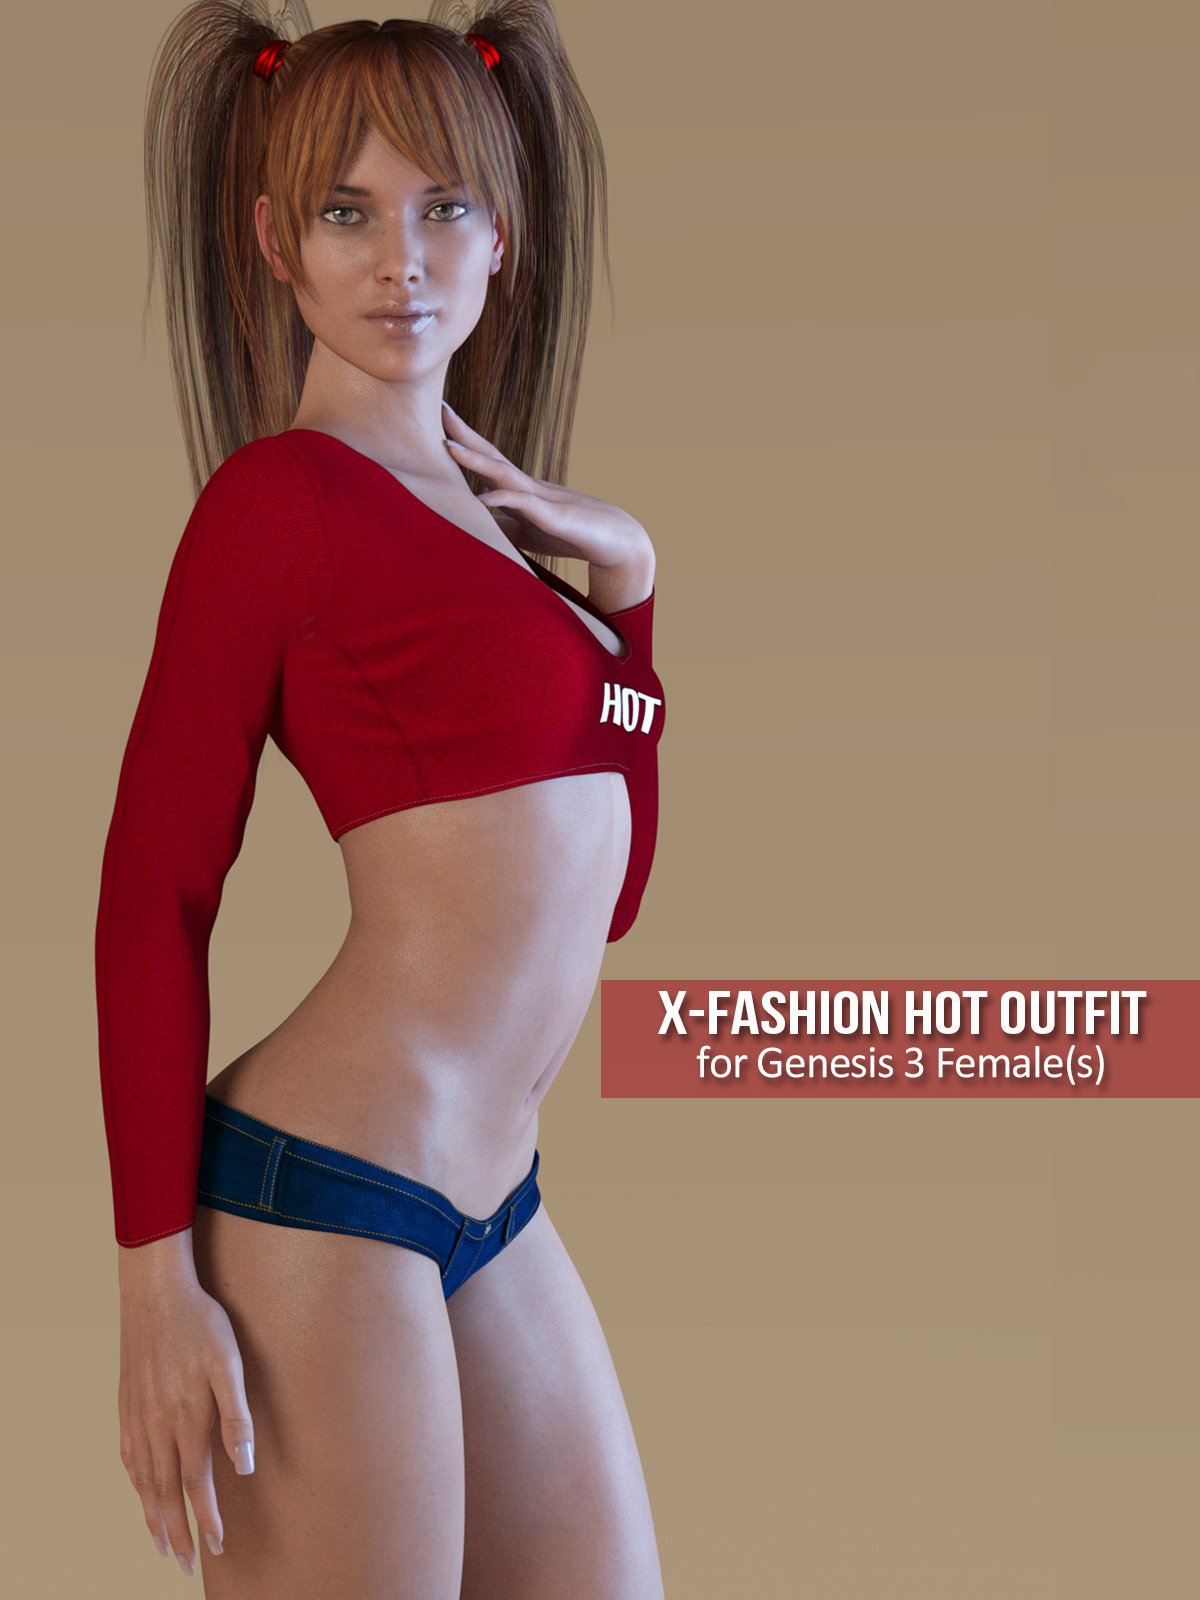 Fashion Hot Outfit for Genesis 3 Females_DAZ3D下载站